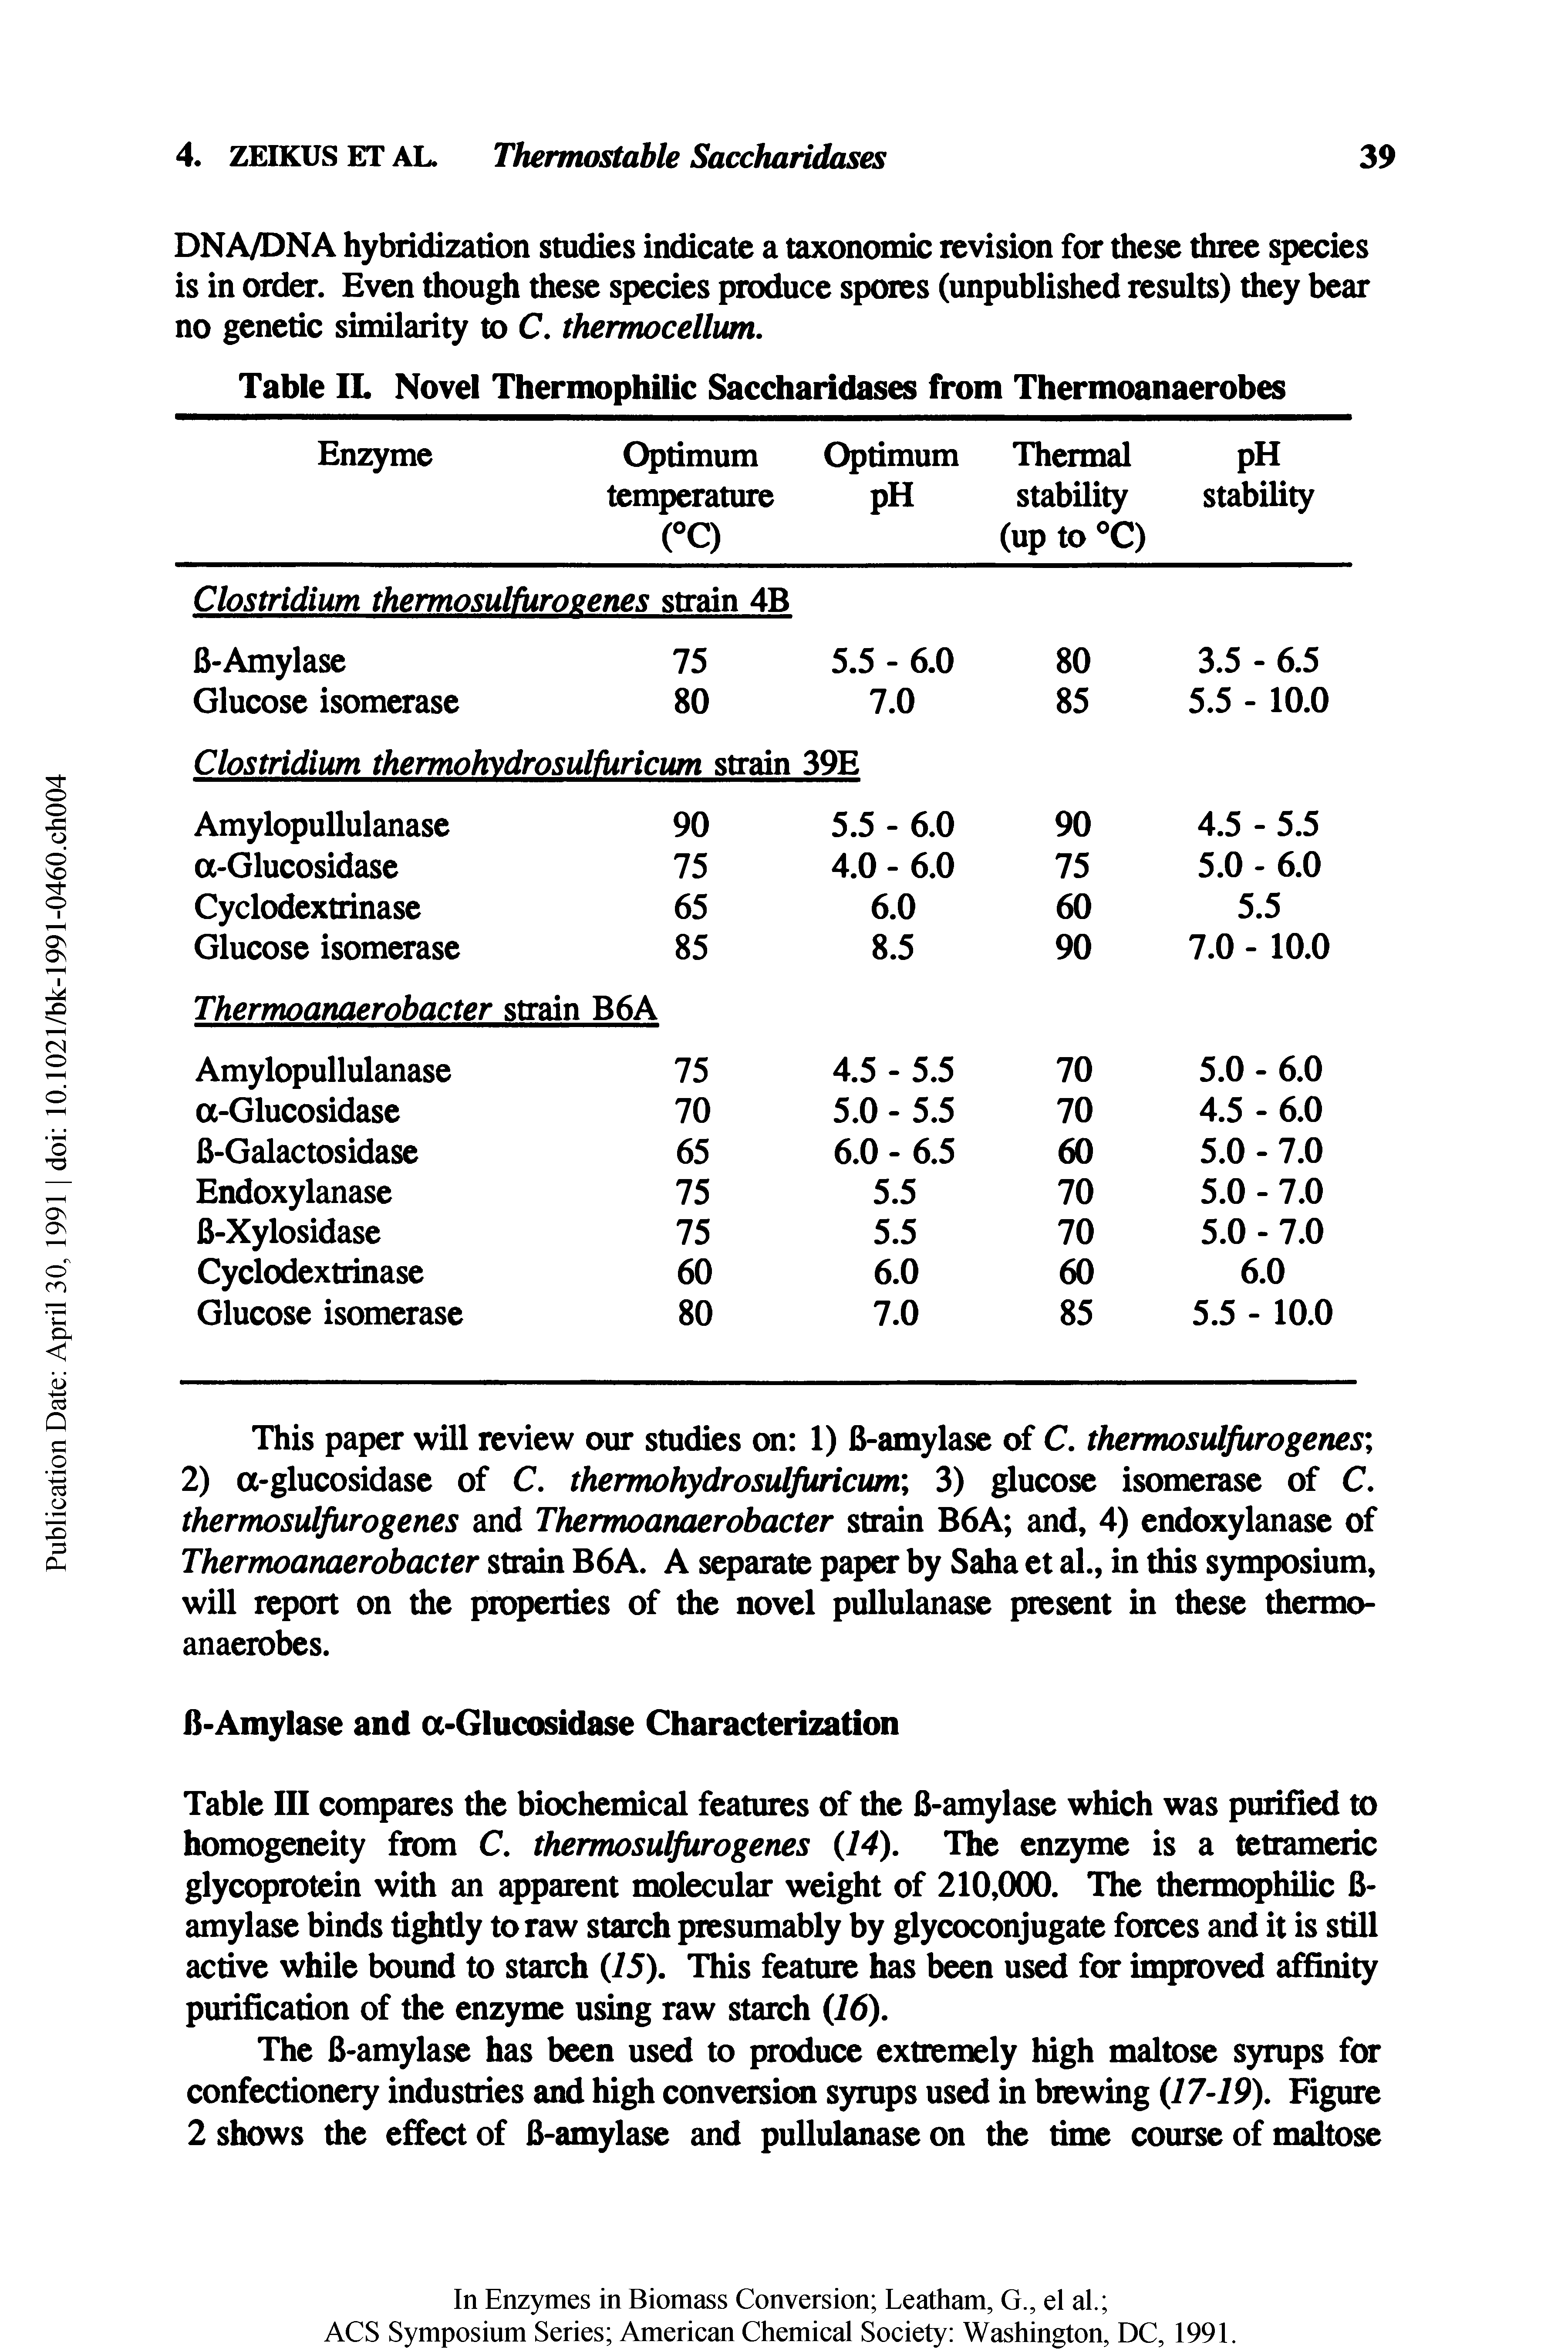 Table III compares the biochemical features of the B-amylase which was purified to homogeneity from C. thermosulfurogenes (74). The enzyme is a tetrameric glycoprotein with an apparent molecular weight of 210,000. The thermophilic B-amylase binds tightly to raw starch presumably by glycoconjugate forces and it is still active while bound to starch (75). This feature has been used for improved affinity purification of the enzyme using raw starch (76).